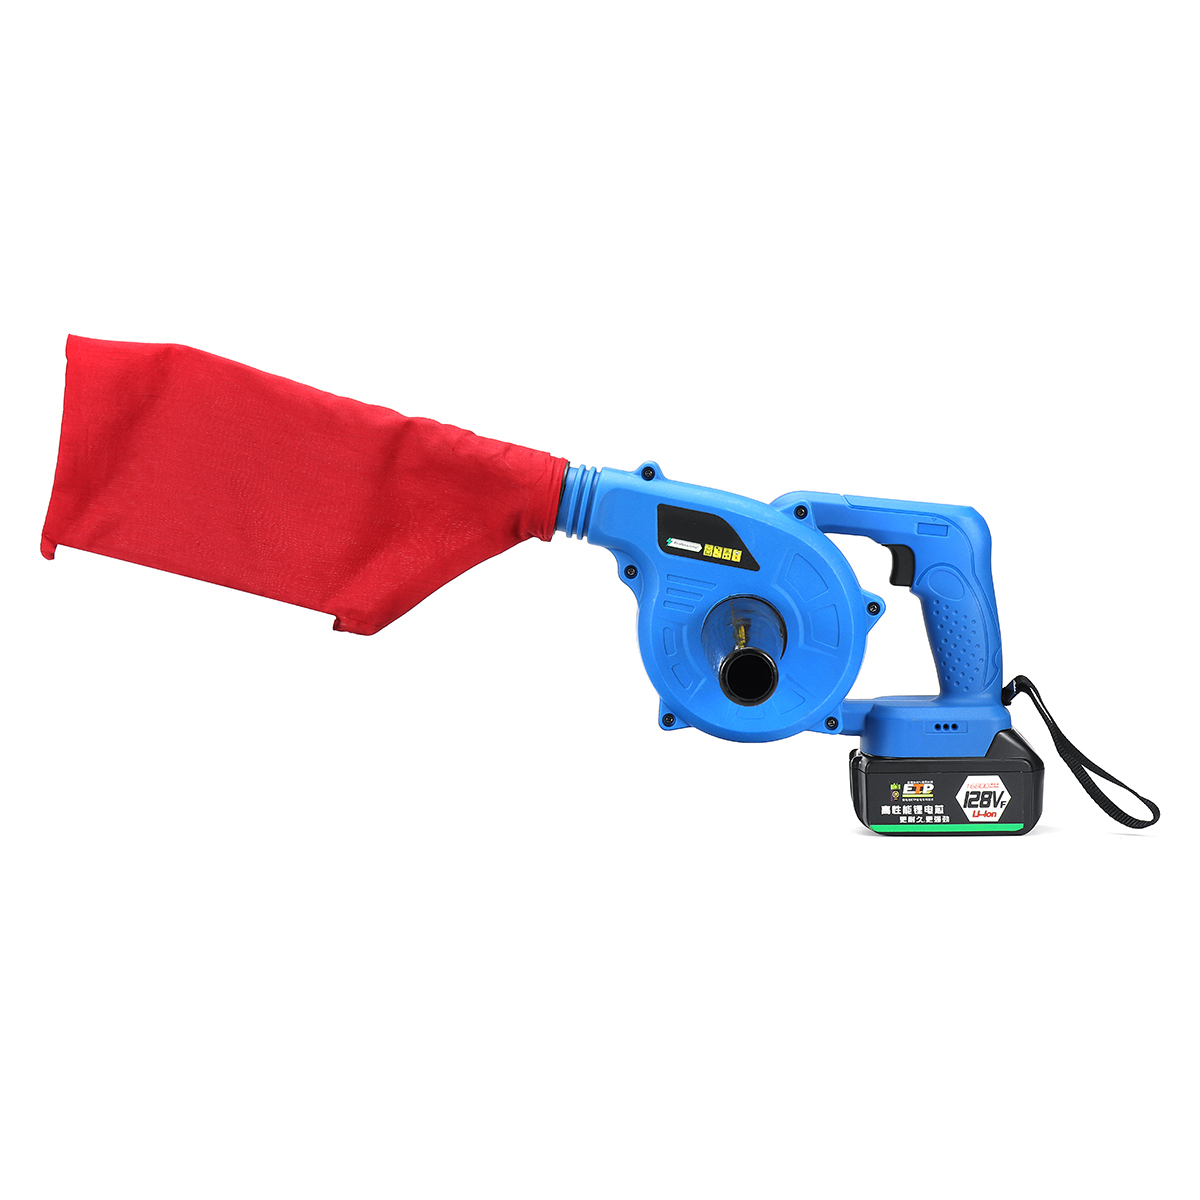 220v-1200W-Electric-Wireless-Handheld-Blower-Computer-Dust-Collector-Rechargeable-Lithium-One-Batter-1562214-3